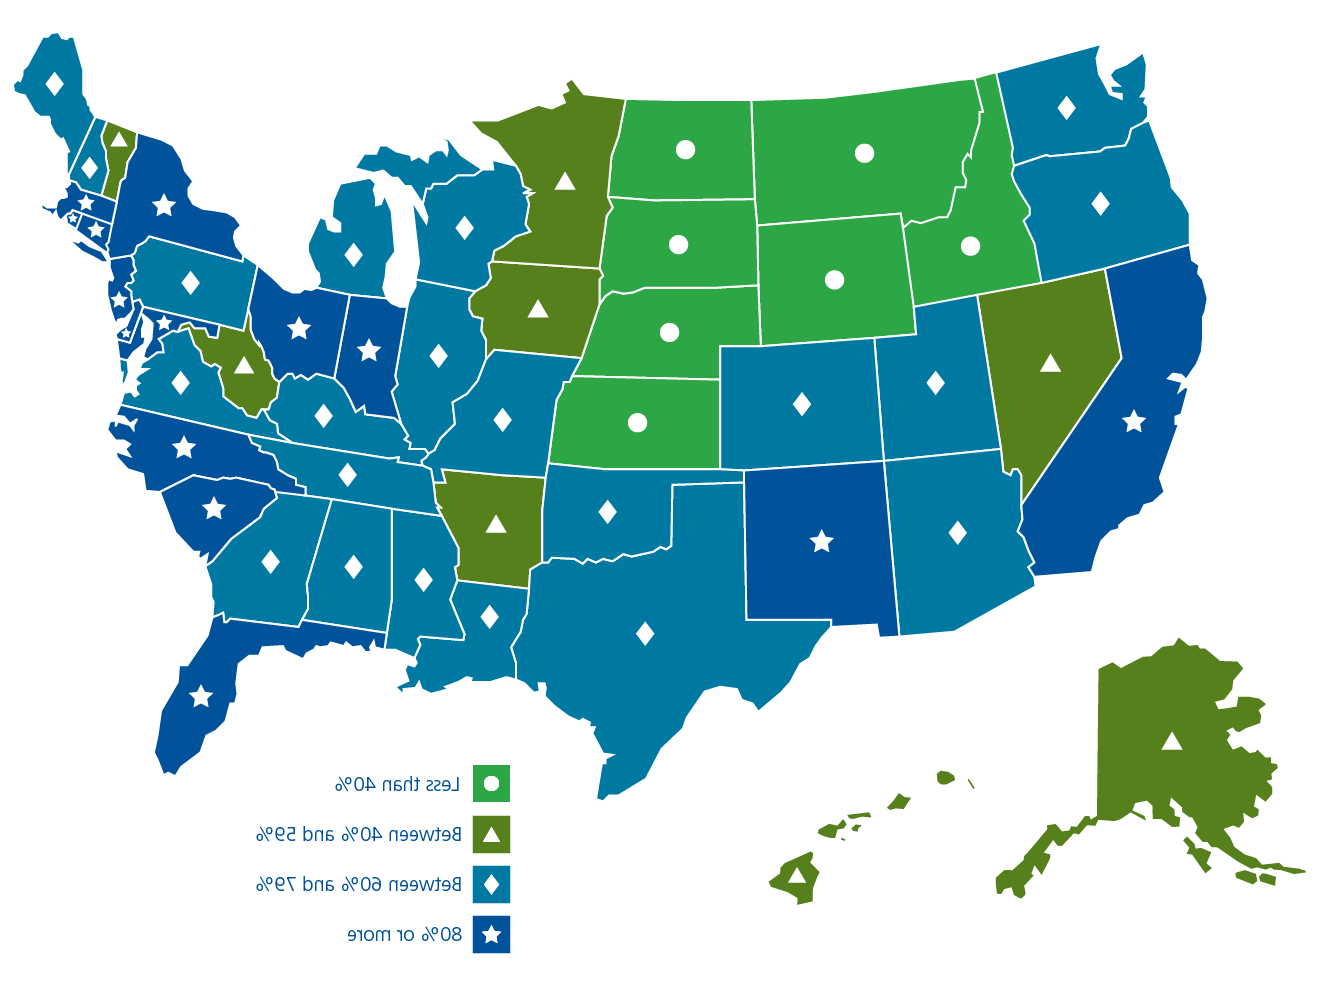 This is a map of the continental U.S., Hawaii, 以及阿拉斯加，显示了一个州内指定为分娩友好型医院的比例. See the link below each image for a description of the image.